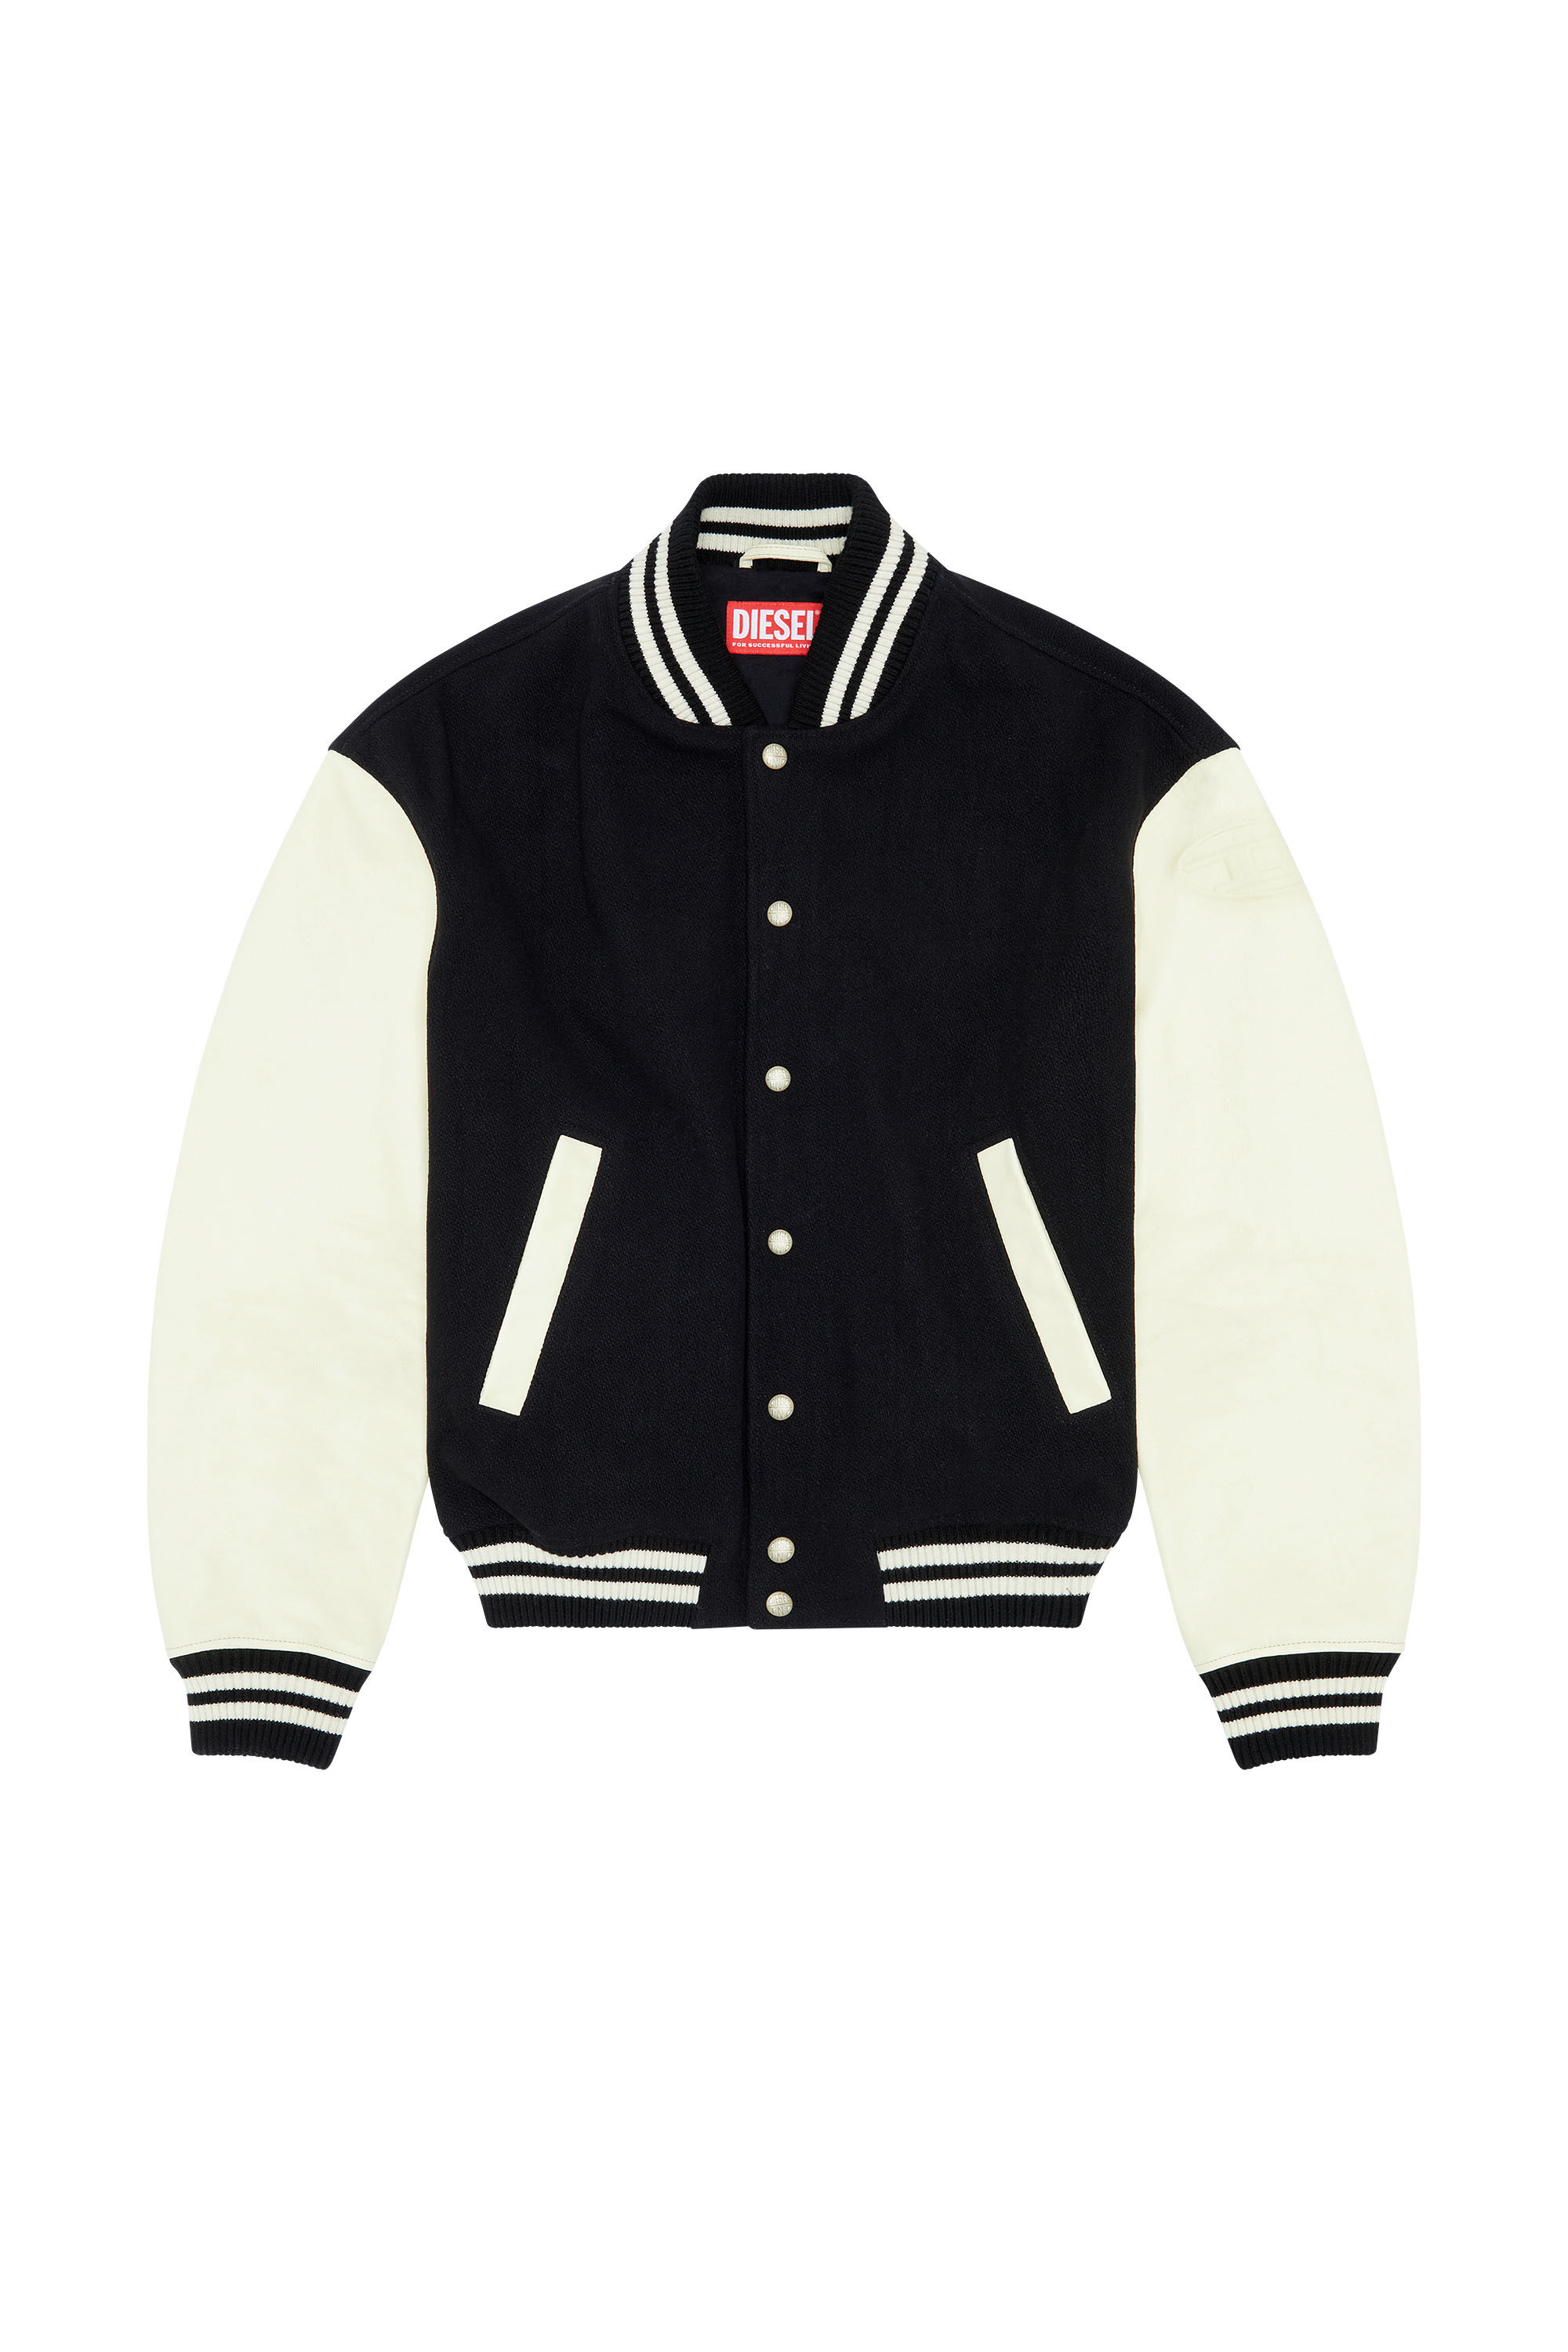 Diesel - L-FRANZ, Man Bomber jacket in leather and wool in Multicolor - Image 2